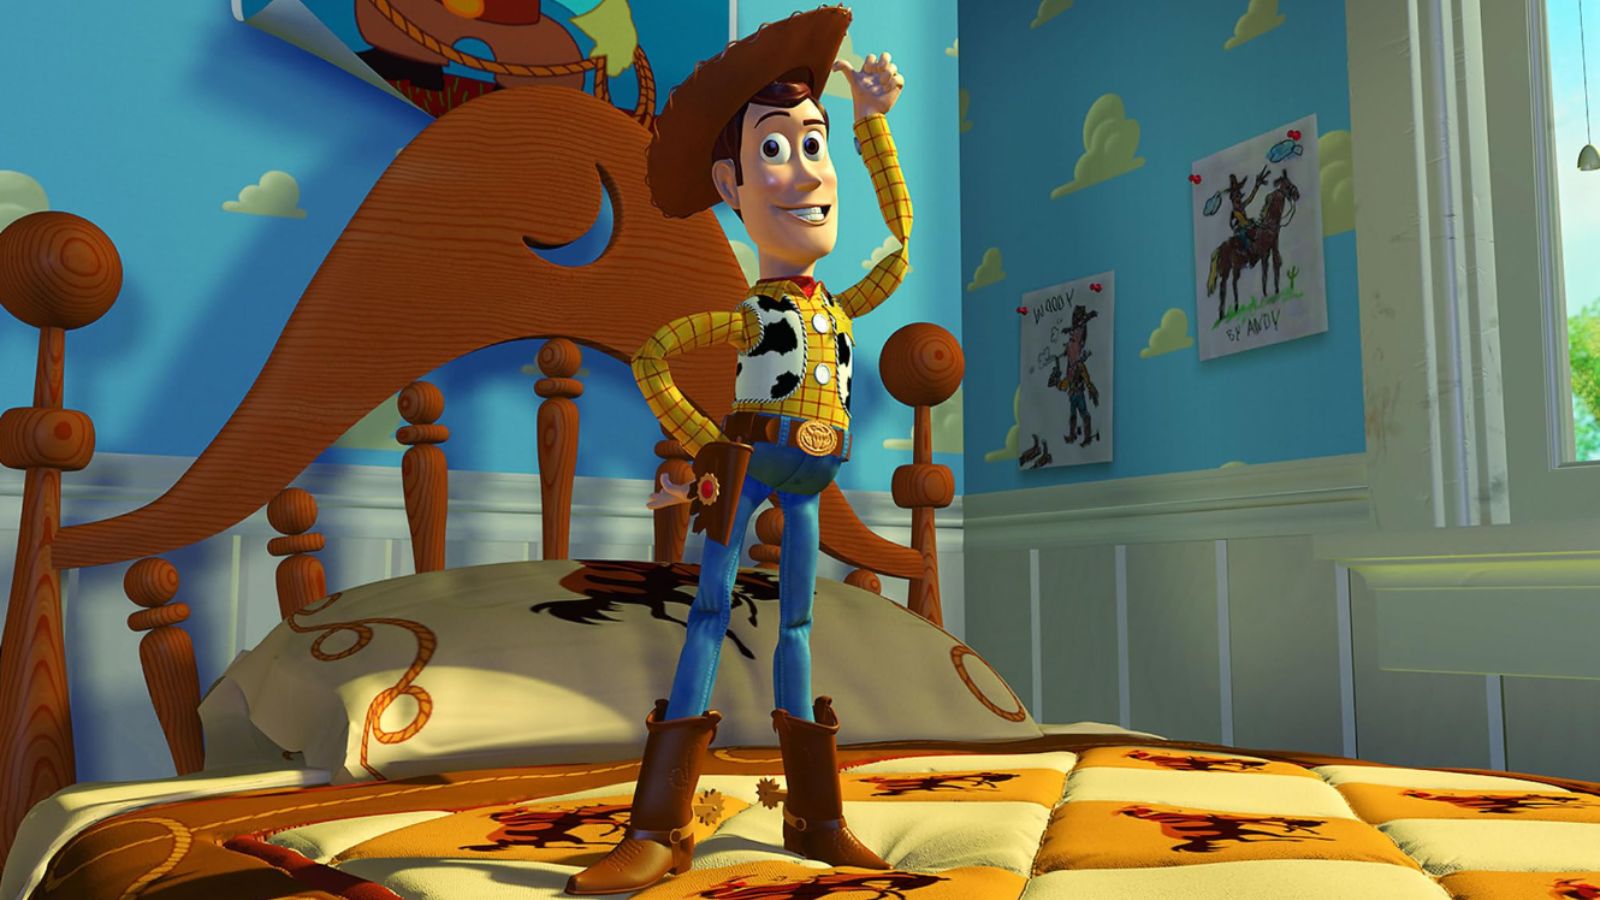 <p class="p2">“Toy Story” is a beloved animated movie that tells the story of a group of toys that come to life when their owner, Andy, is not around. The movie is filled with memorable quotes that have become a part of pop culture.</p> <p class="p2">One of the most famous quotes from the movie is “To infinity and beyond,” which is spoken by Buzz Lightyear. The quote has become a catchphrase and is often used to express a sense of adventure and exploration. Another iconic quote from the movie is “You’ve got a friend in me,” which is the theme song of the movie. The quote represents the bond between Andy and his toys.</p>